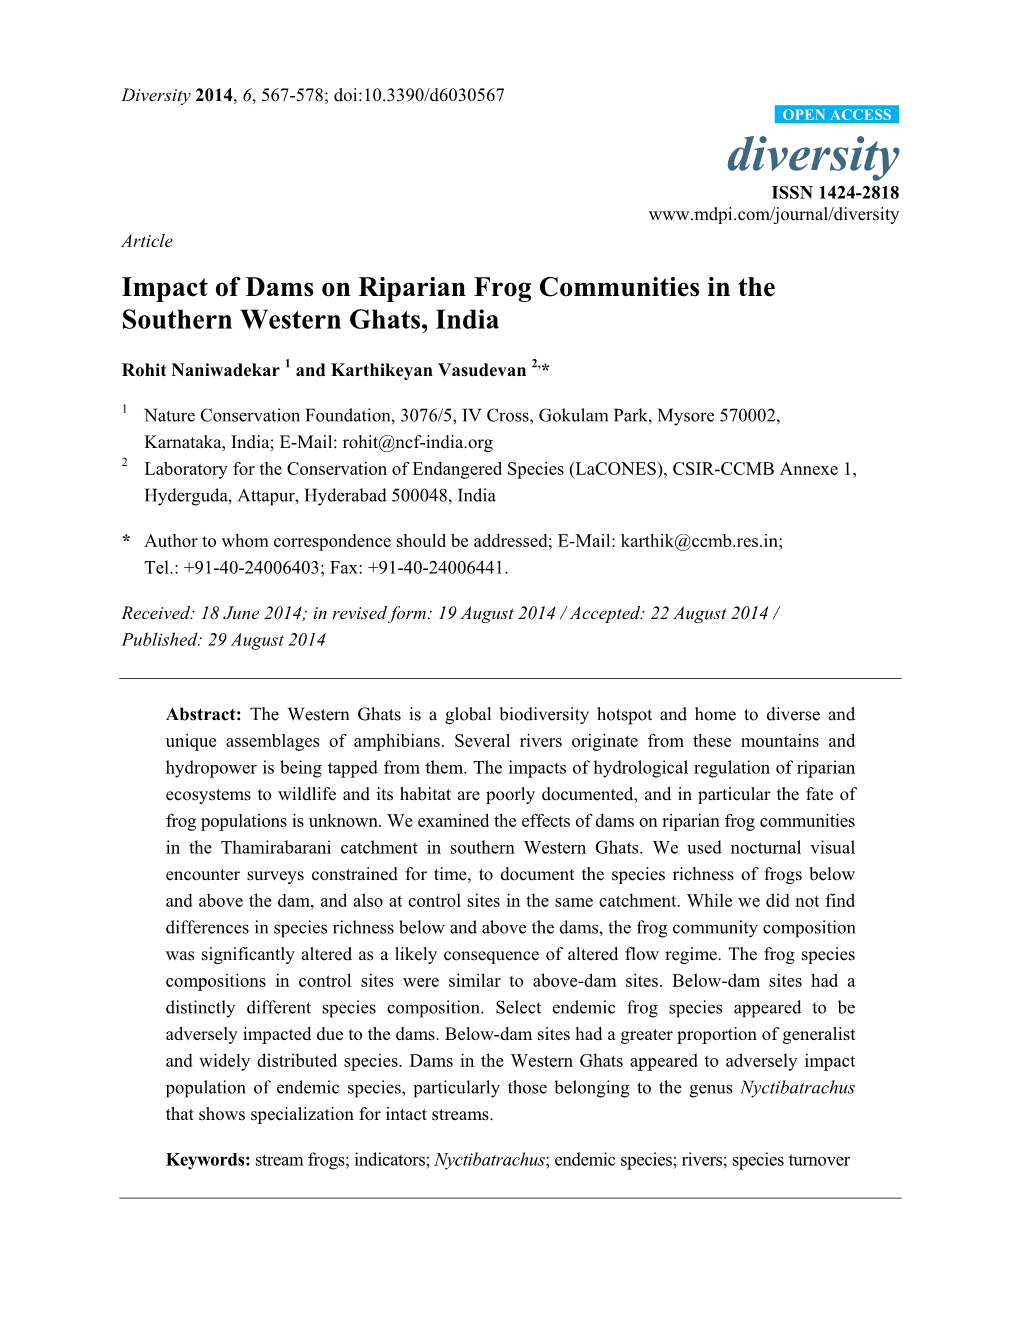 Impact of Dams on Riparian Frog Communities in the Southern Western Ghats, India